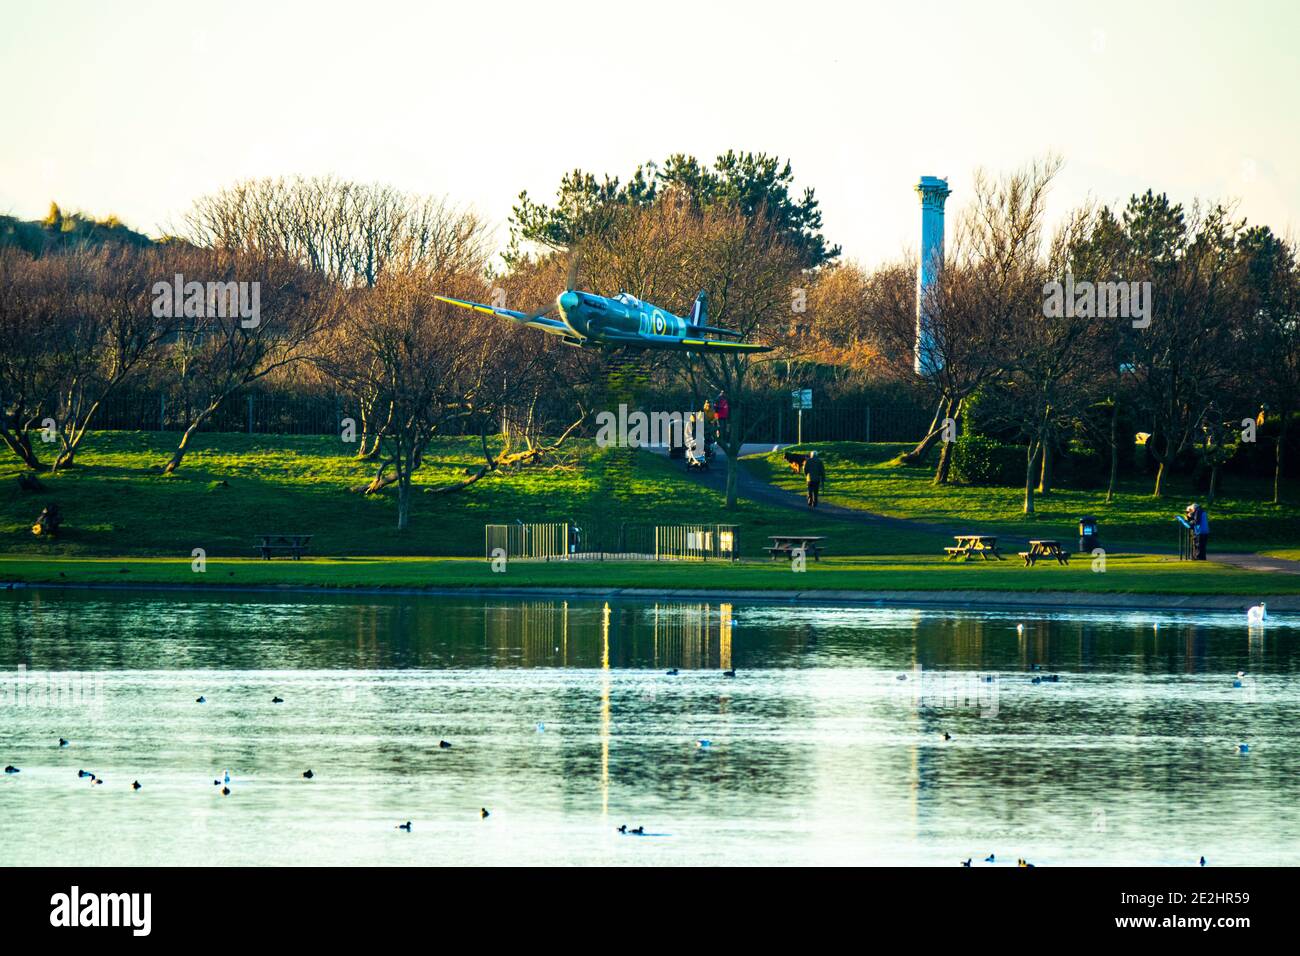 Full size model spitfire aircraft at Fairhaven lake Lytham St Annes Stock Photo